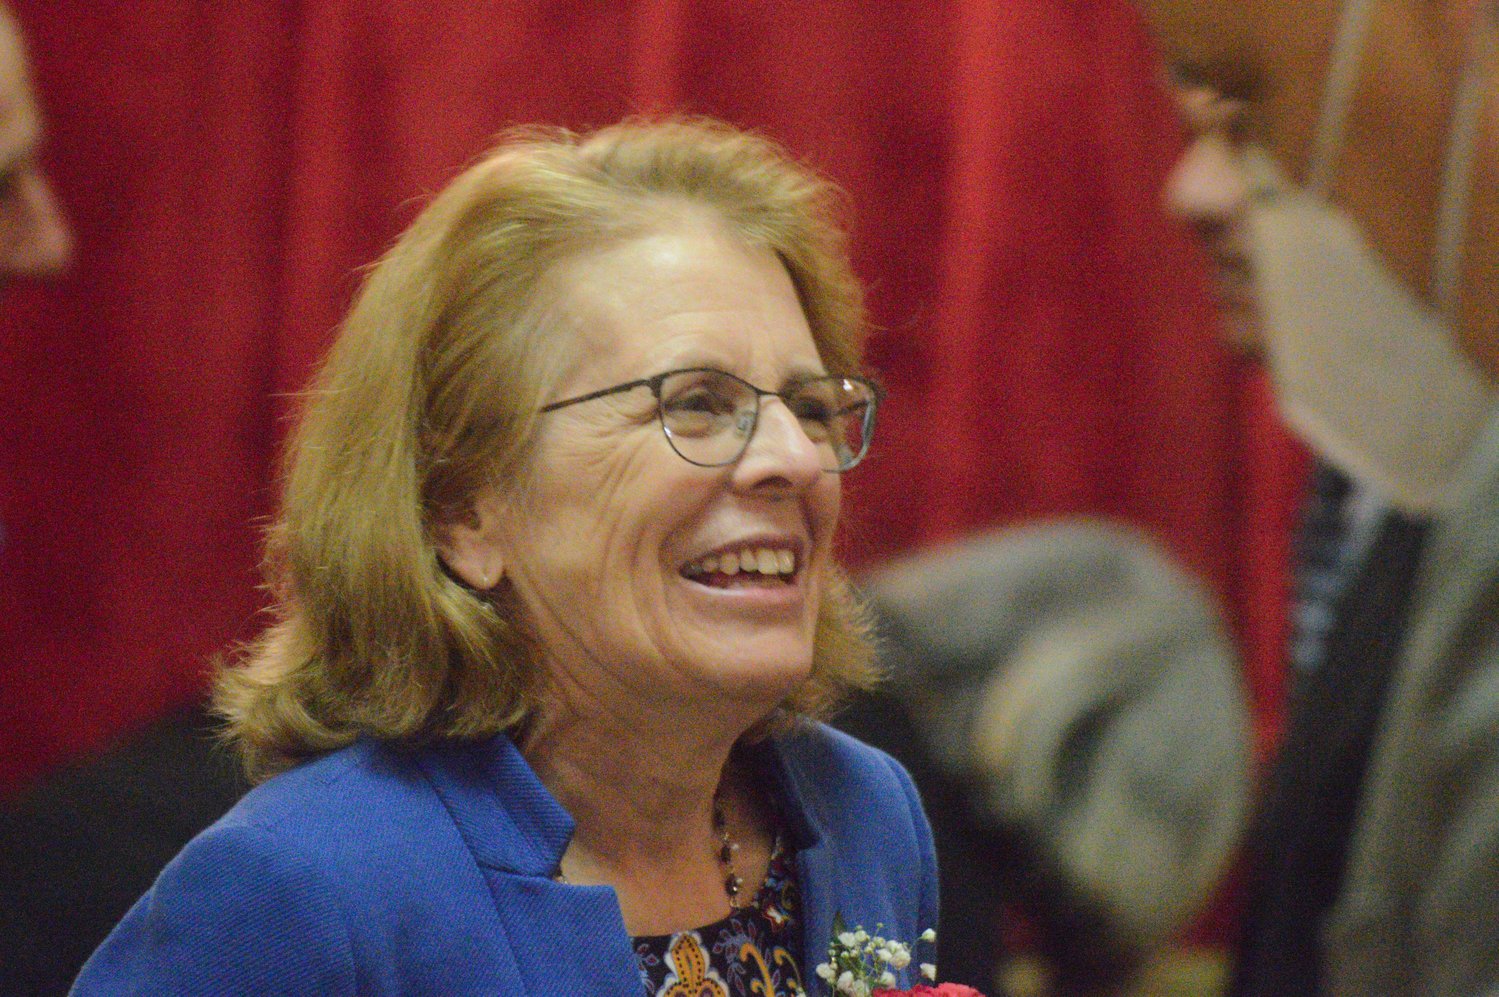 Rep. Terri Cortvriend (D-Dist. 72) at her desk in the House chambers Tuesday before being sworn in for her third term.